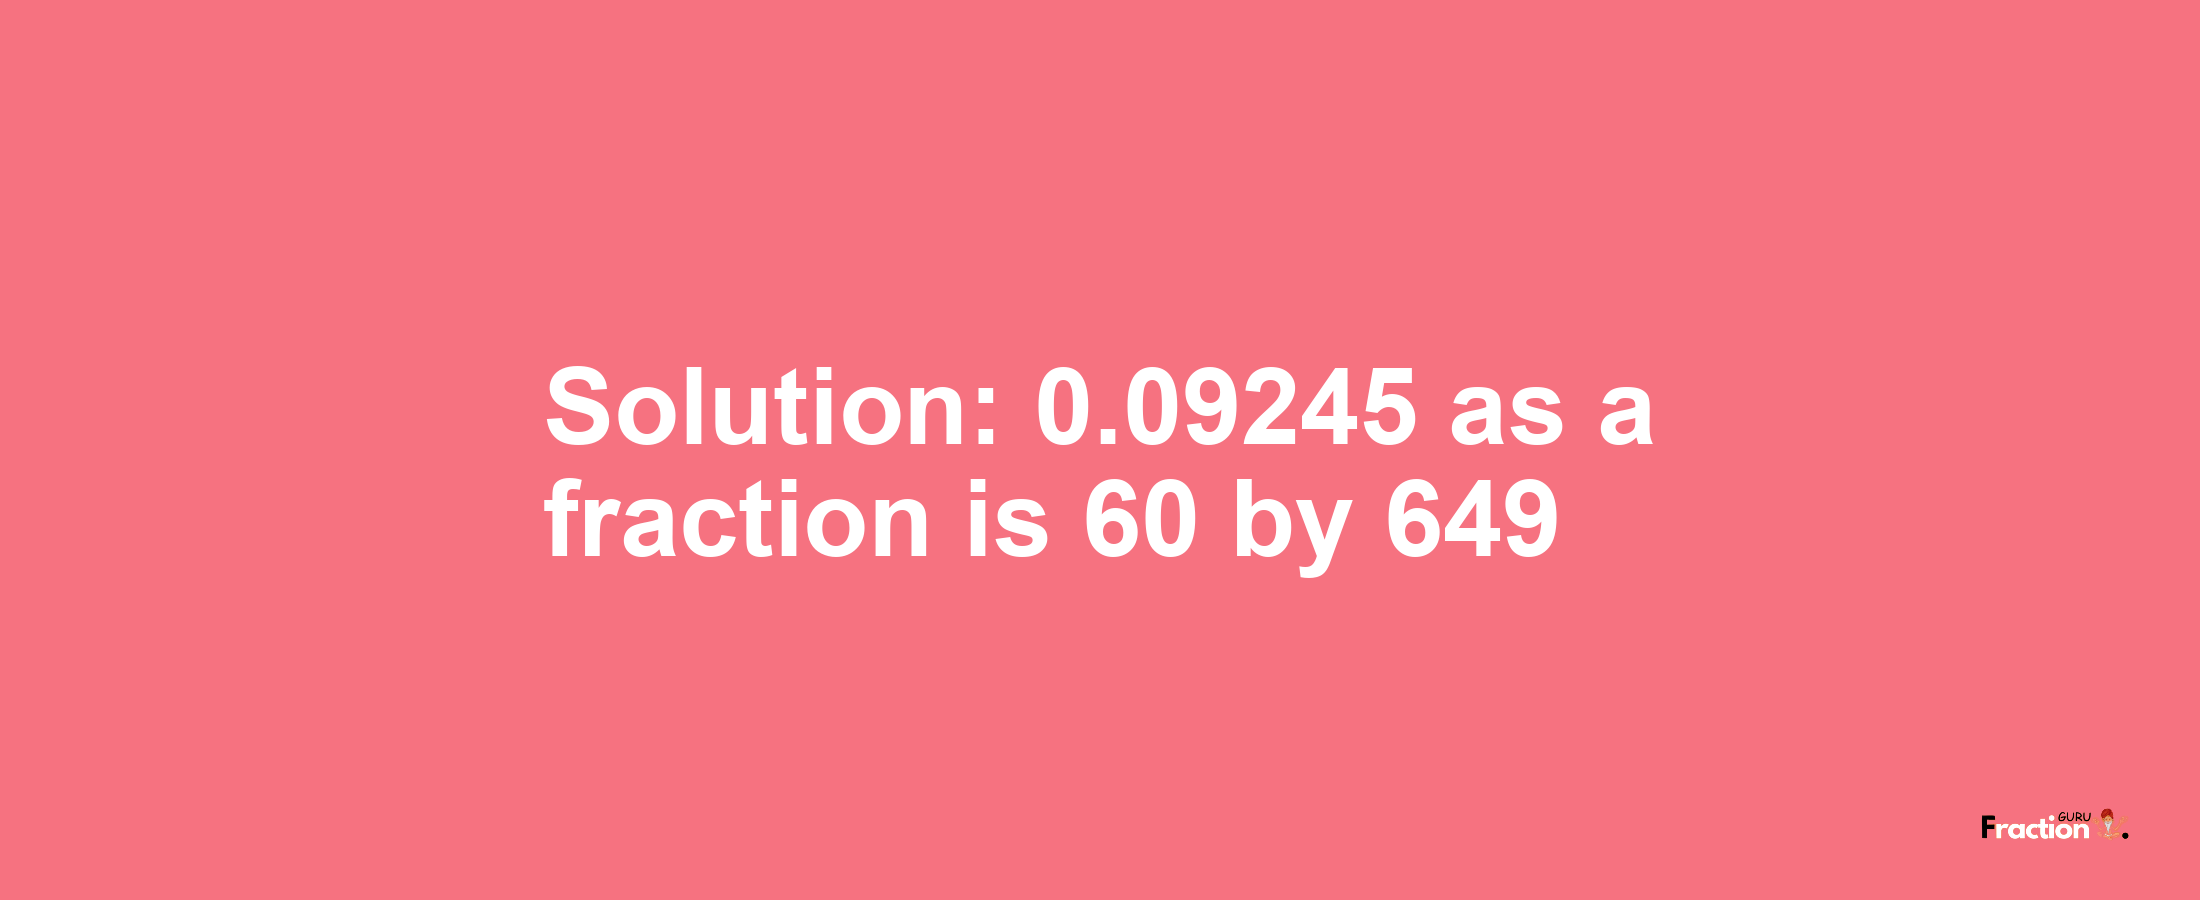 Solution:0.09245 as a fraction is 60/649